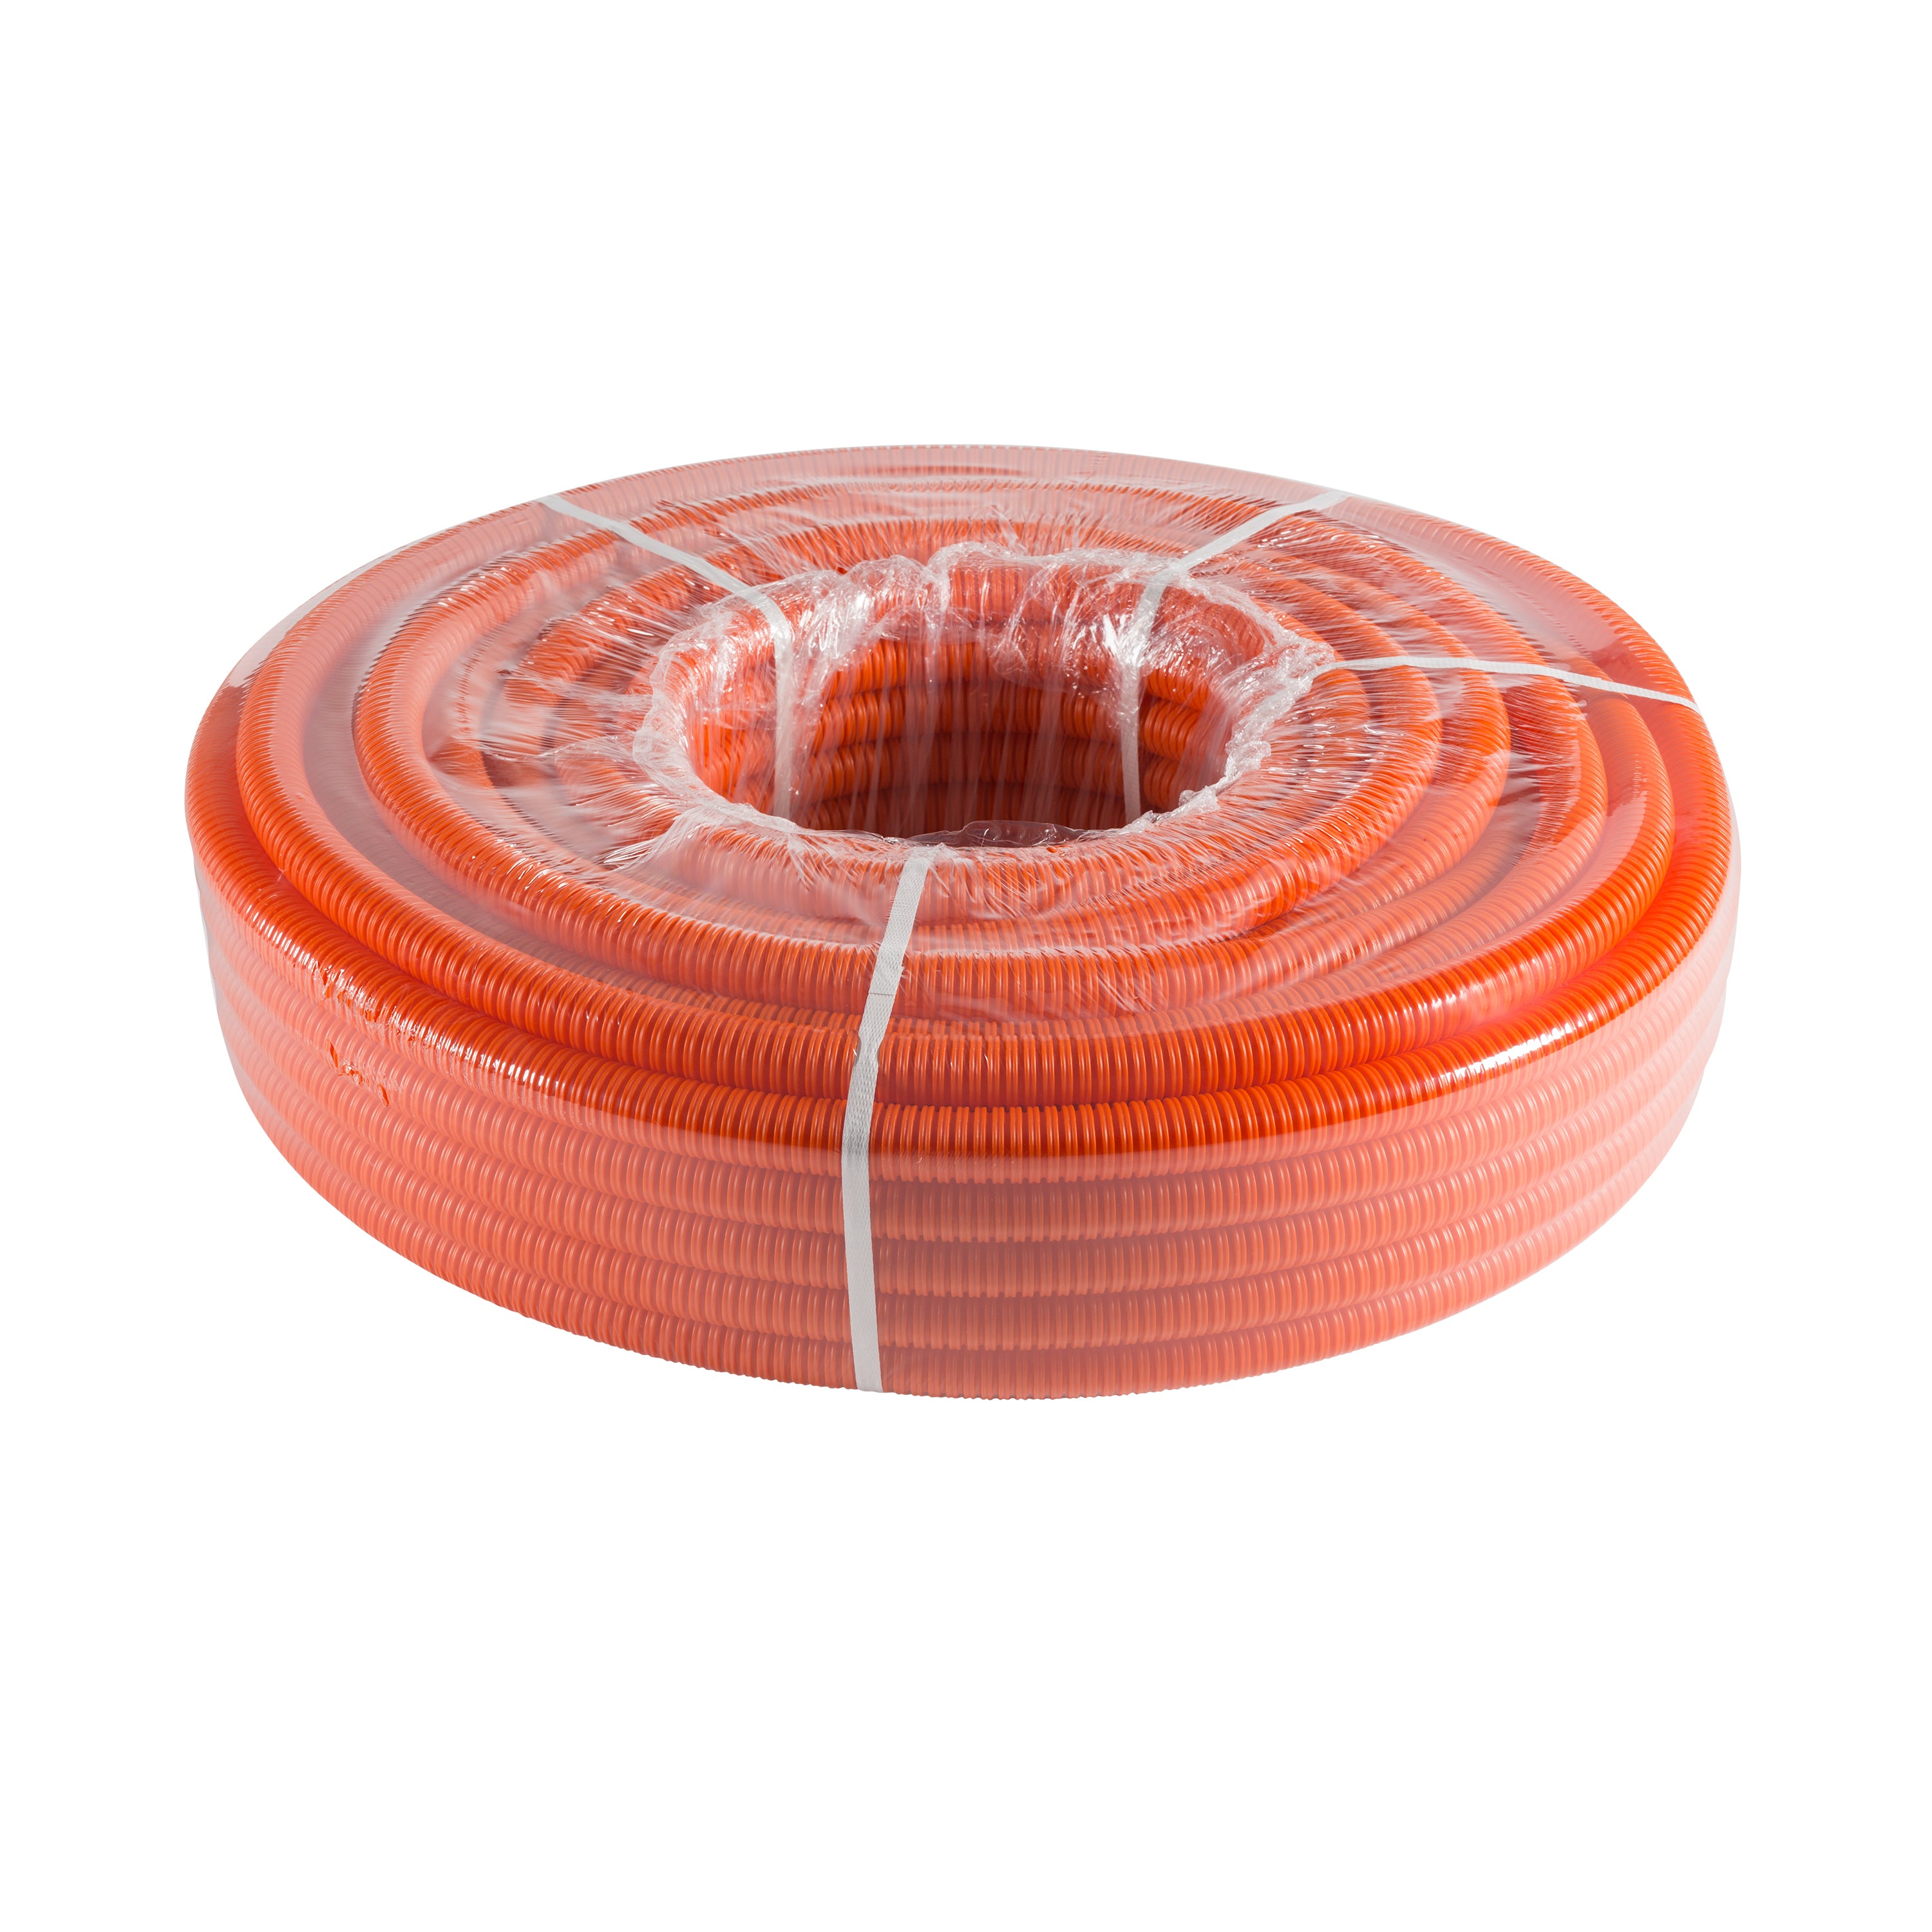 DCPC100-H250 DirectConnect™, 1 Conduit, 250', w/Pull String. Orange HDPE,  for Low Voltage Wire